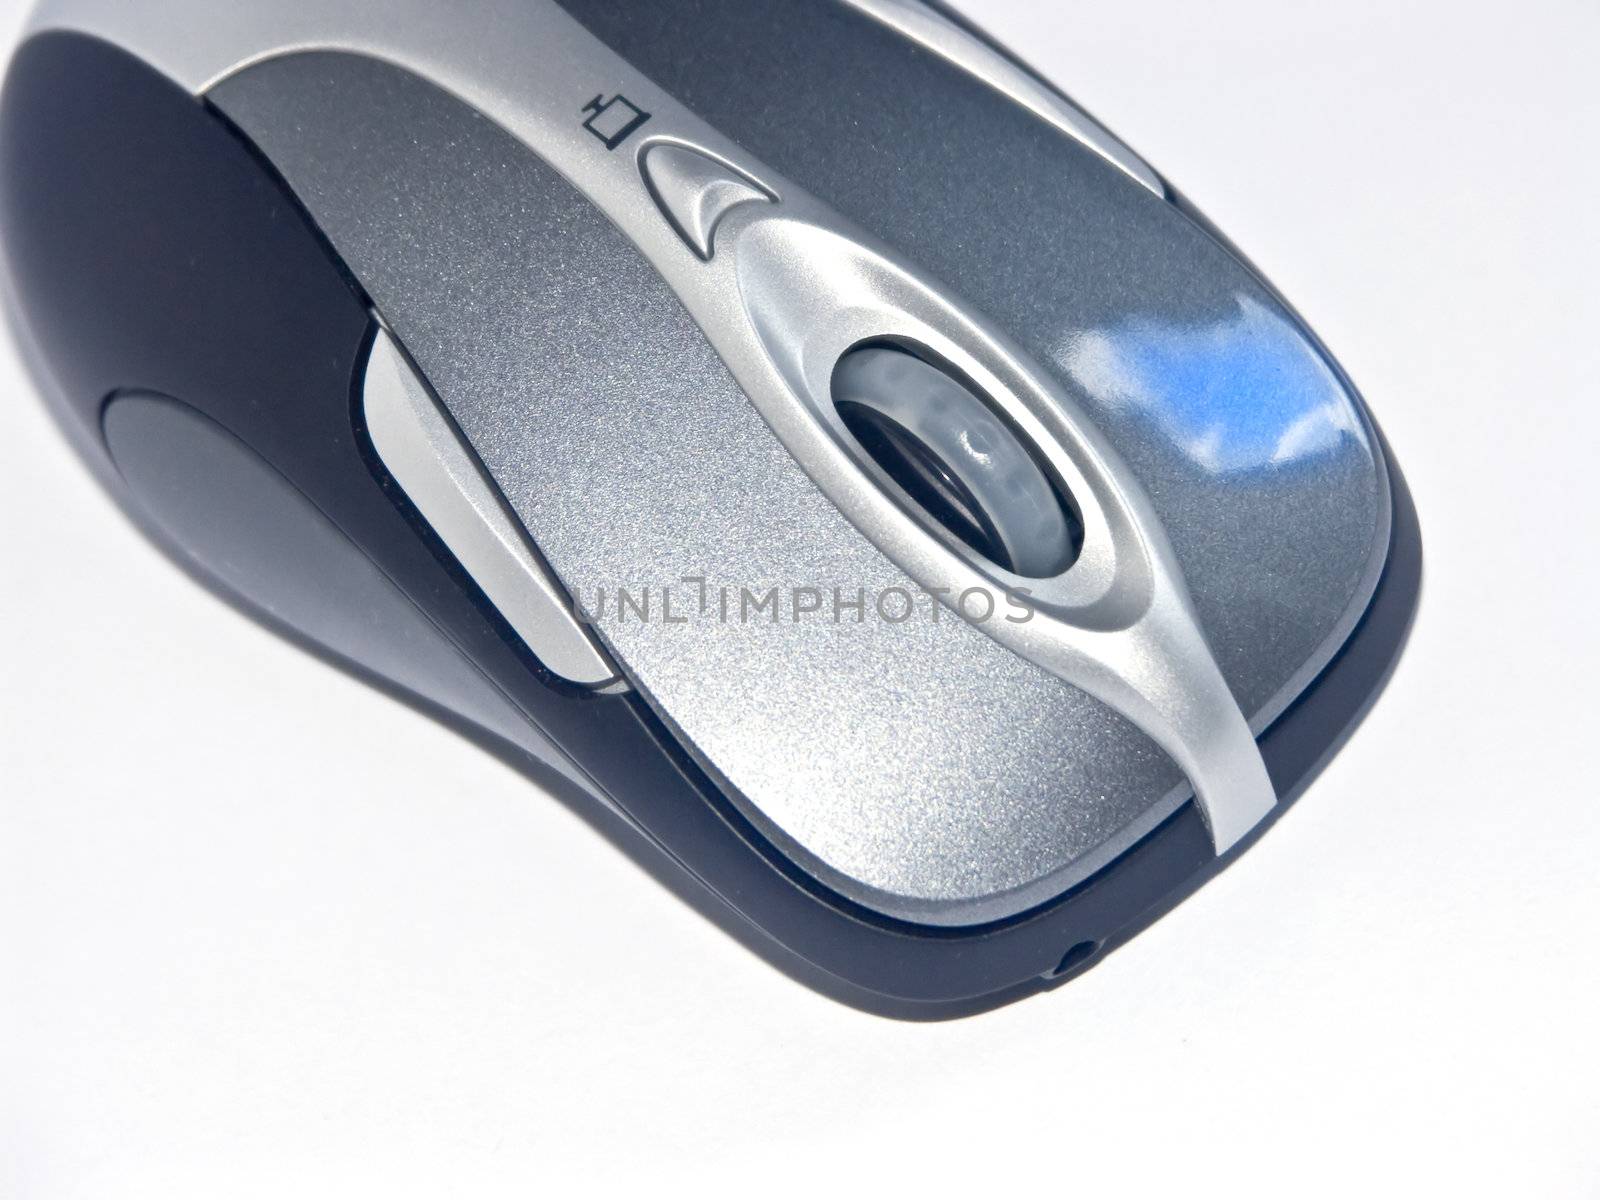 The image of the computer mouse on a homogeneous background